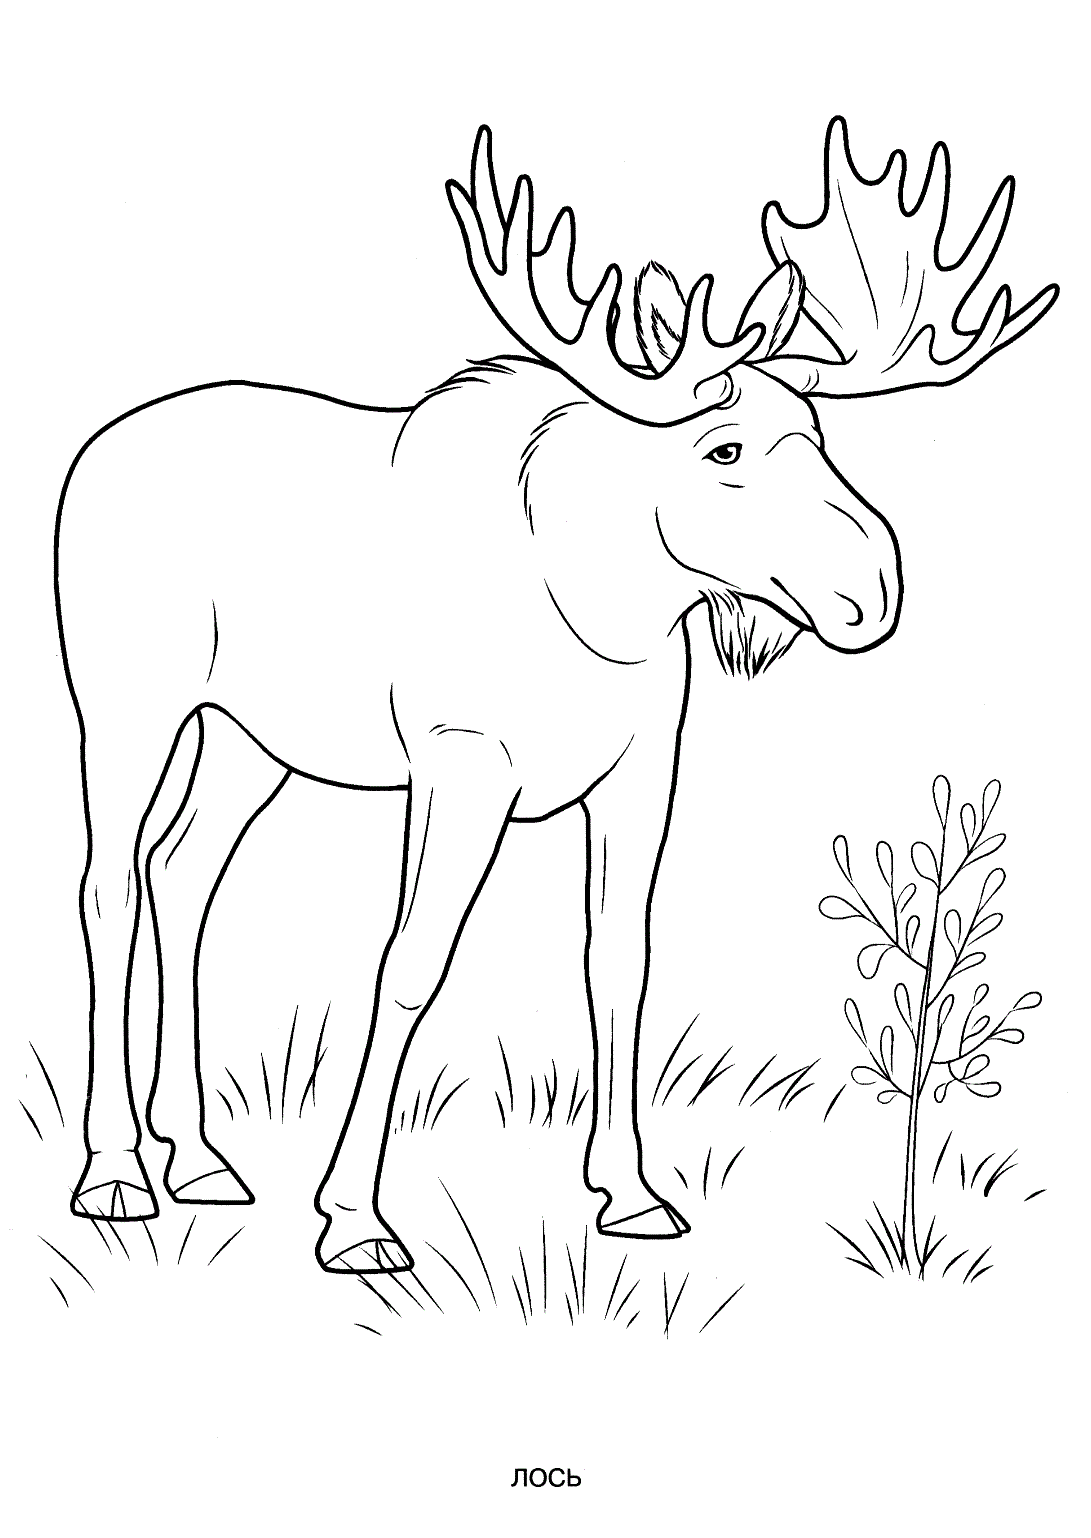 Realistic Wild Animal Coloring Pages / Coloring page 43 coloring page